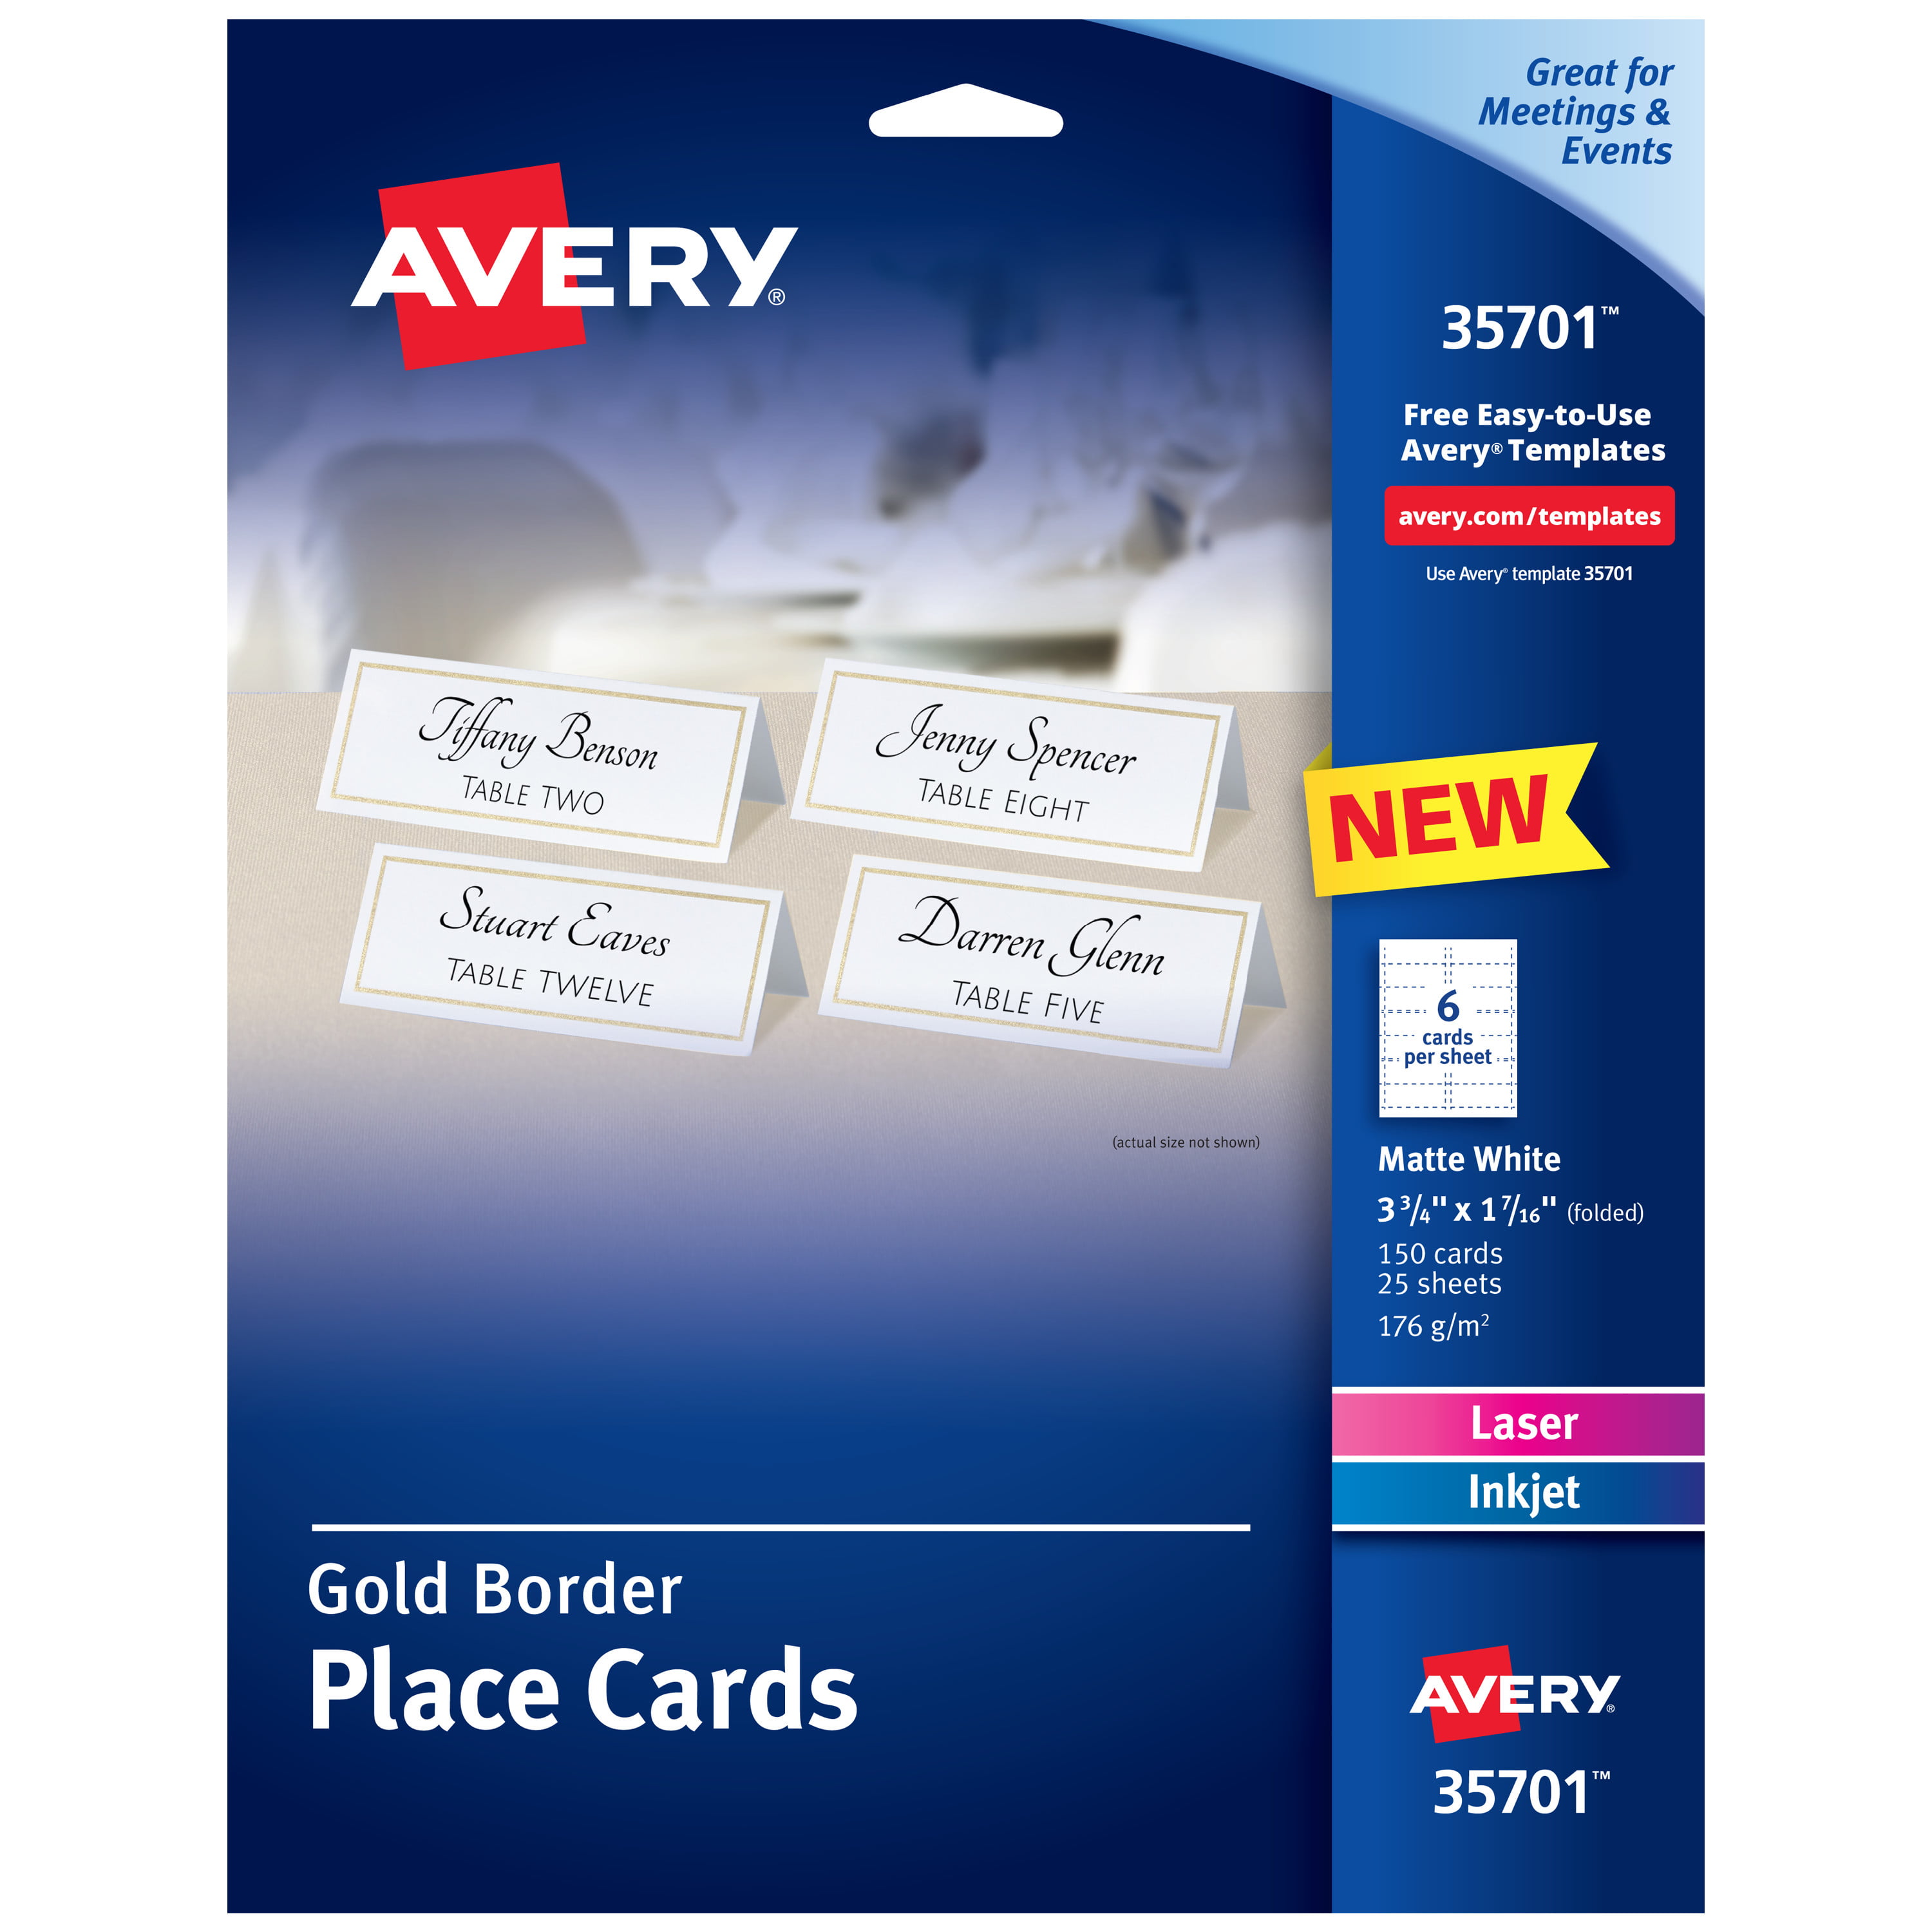 avery-place-cards-with-gold-border-1-7-16-x-3-3-4-65-lbs-150-cards